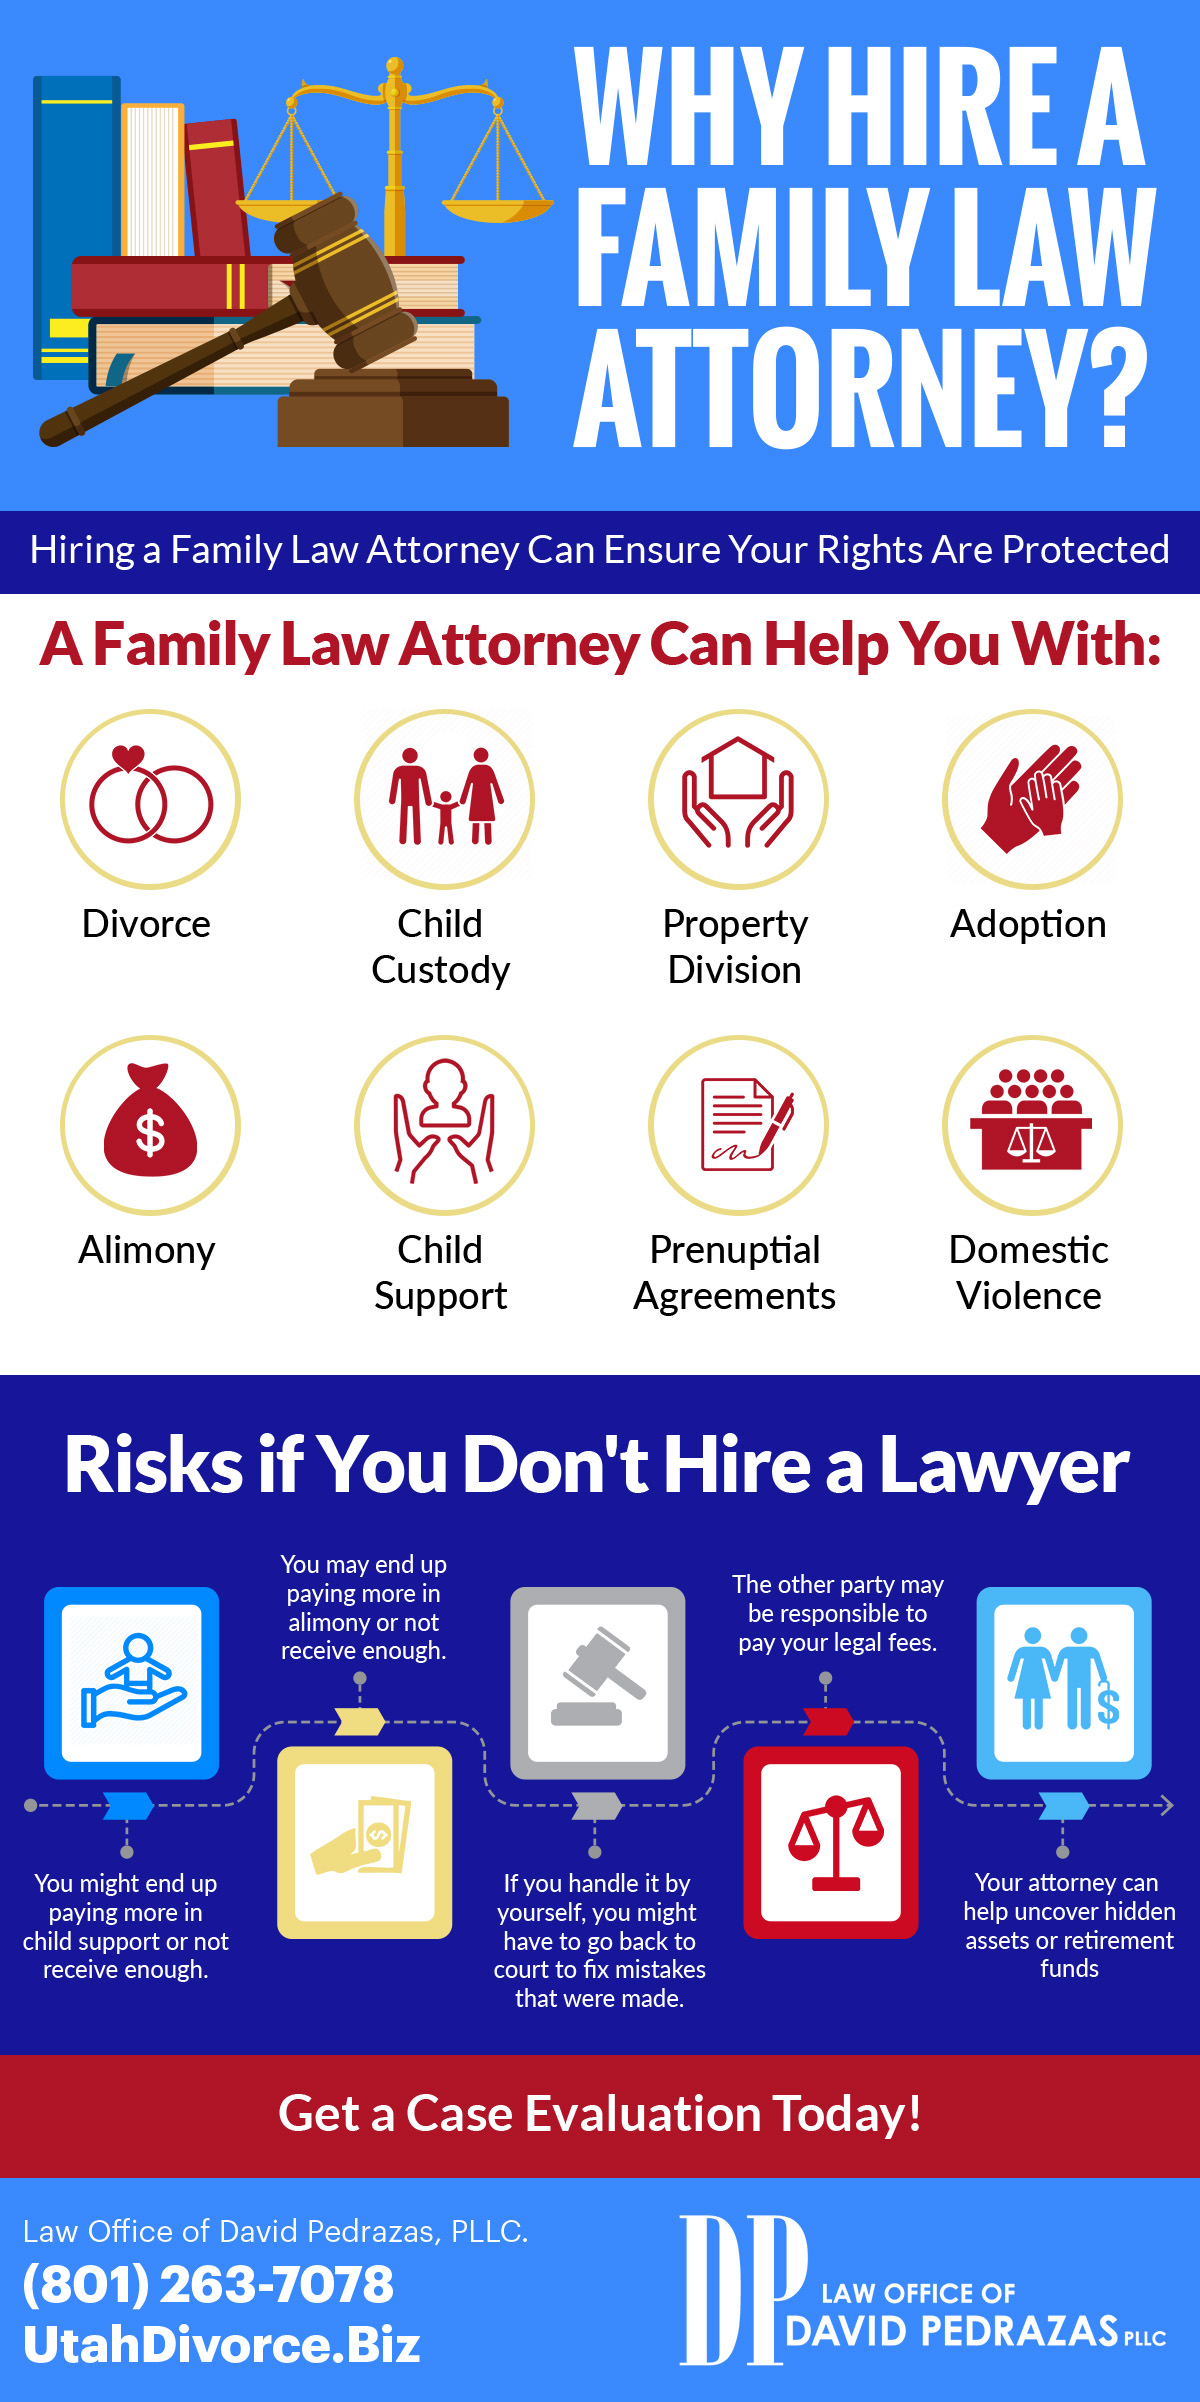 Family law attorney infographic - The Law Office of David Pedrazas PLLC